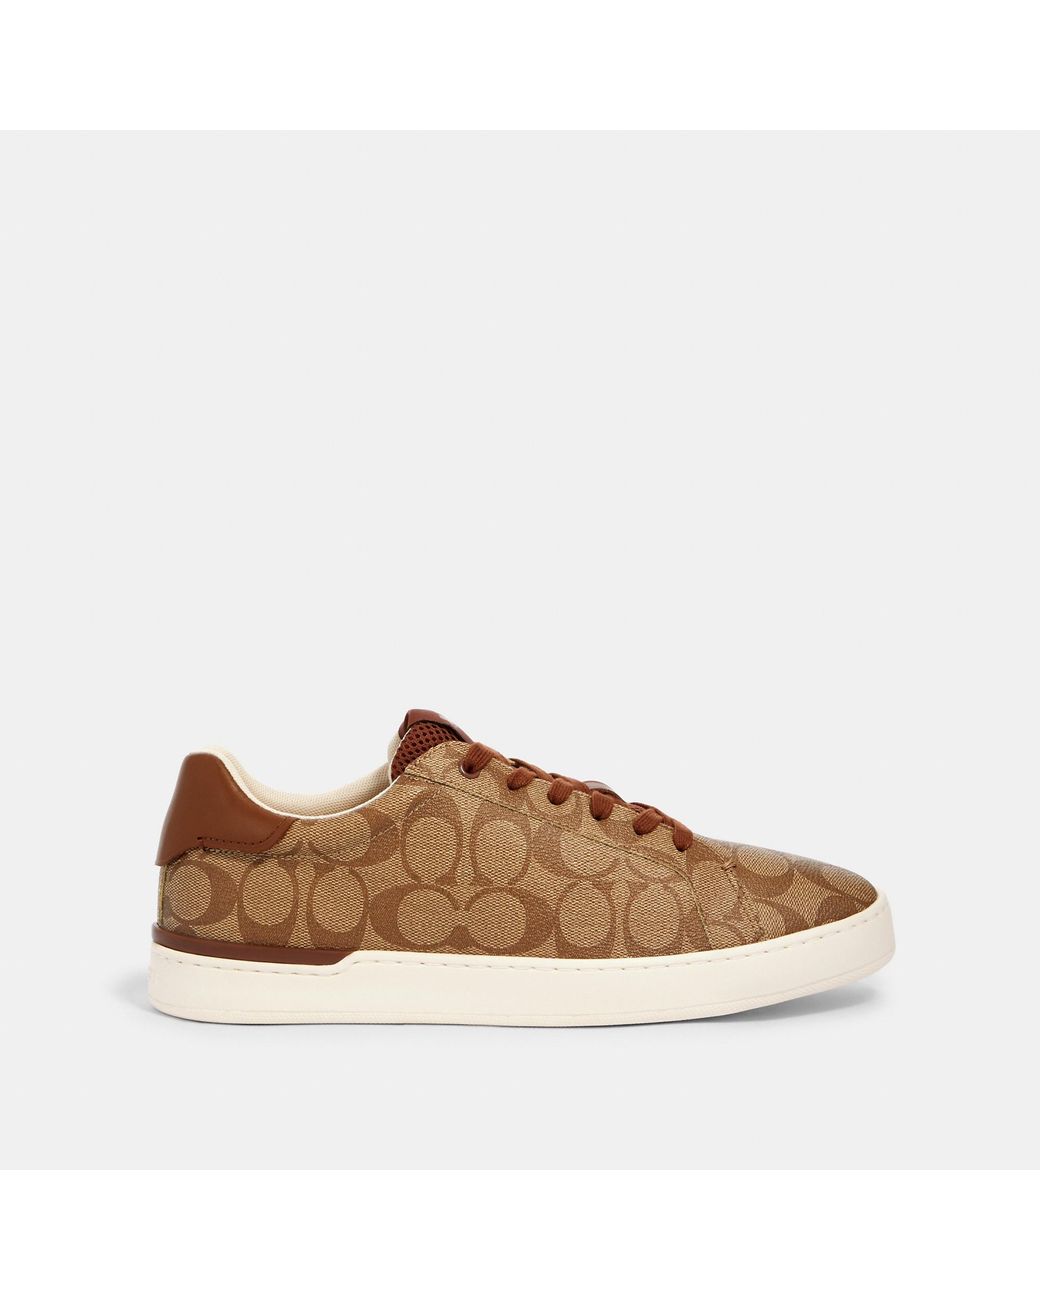 Coach Outlet Canvas Clip Low Top Sneaker in Natural for Men - Lyst